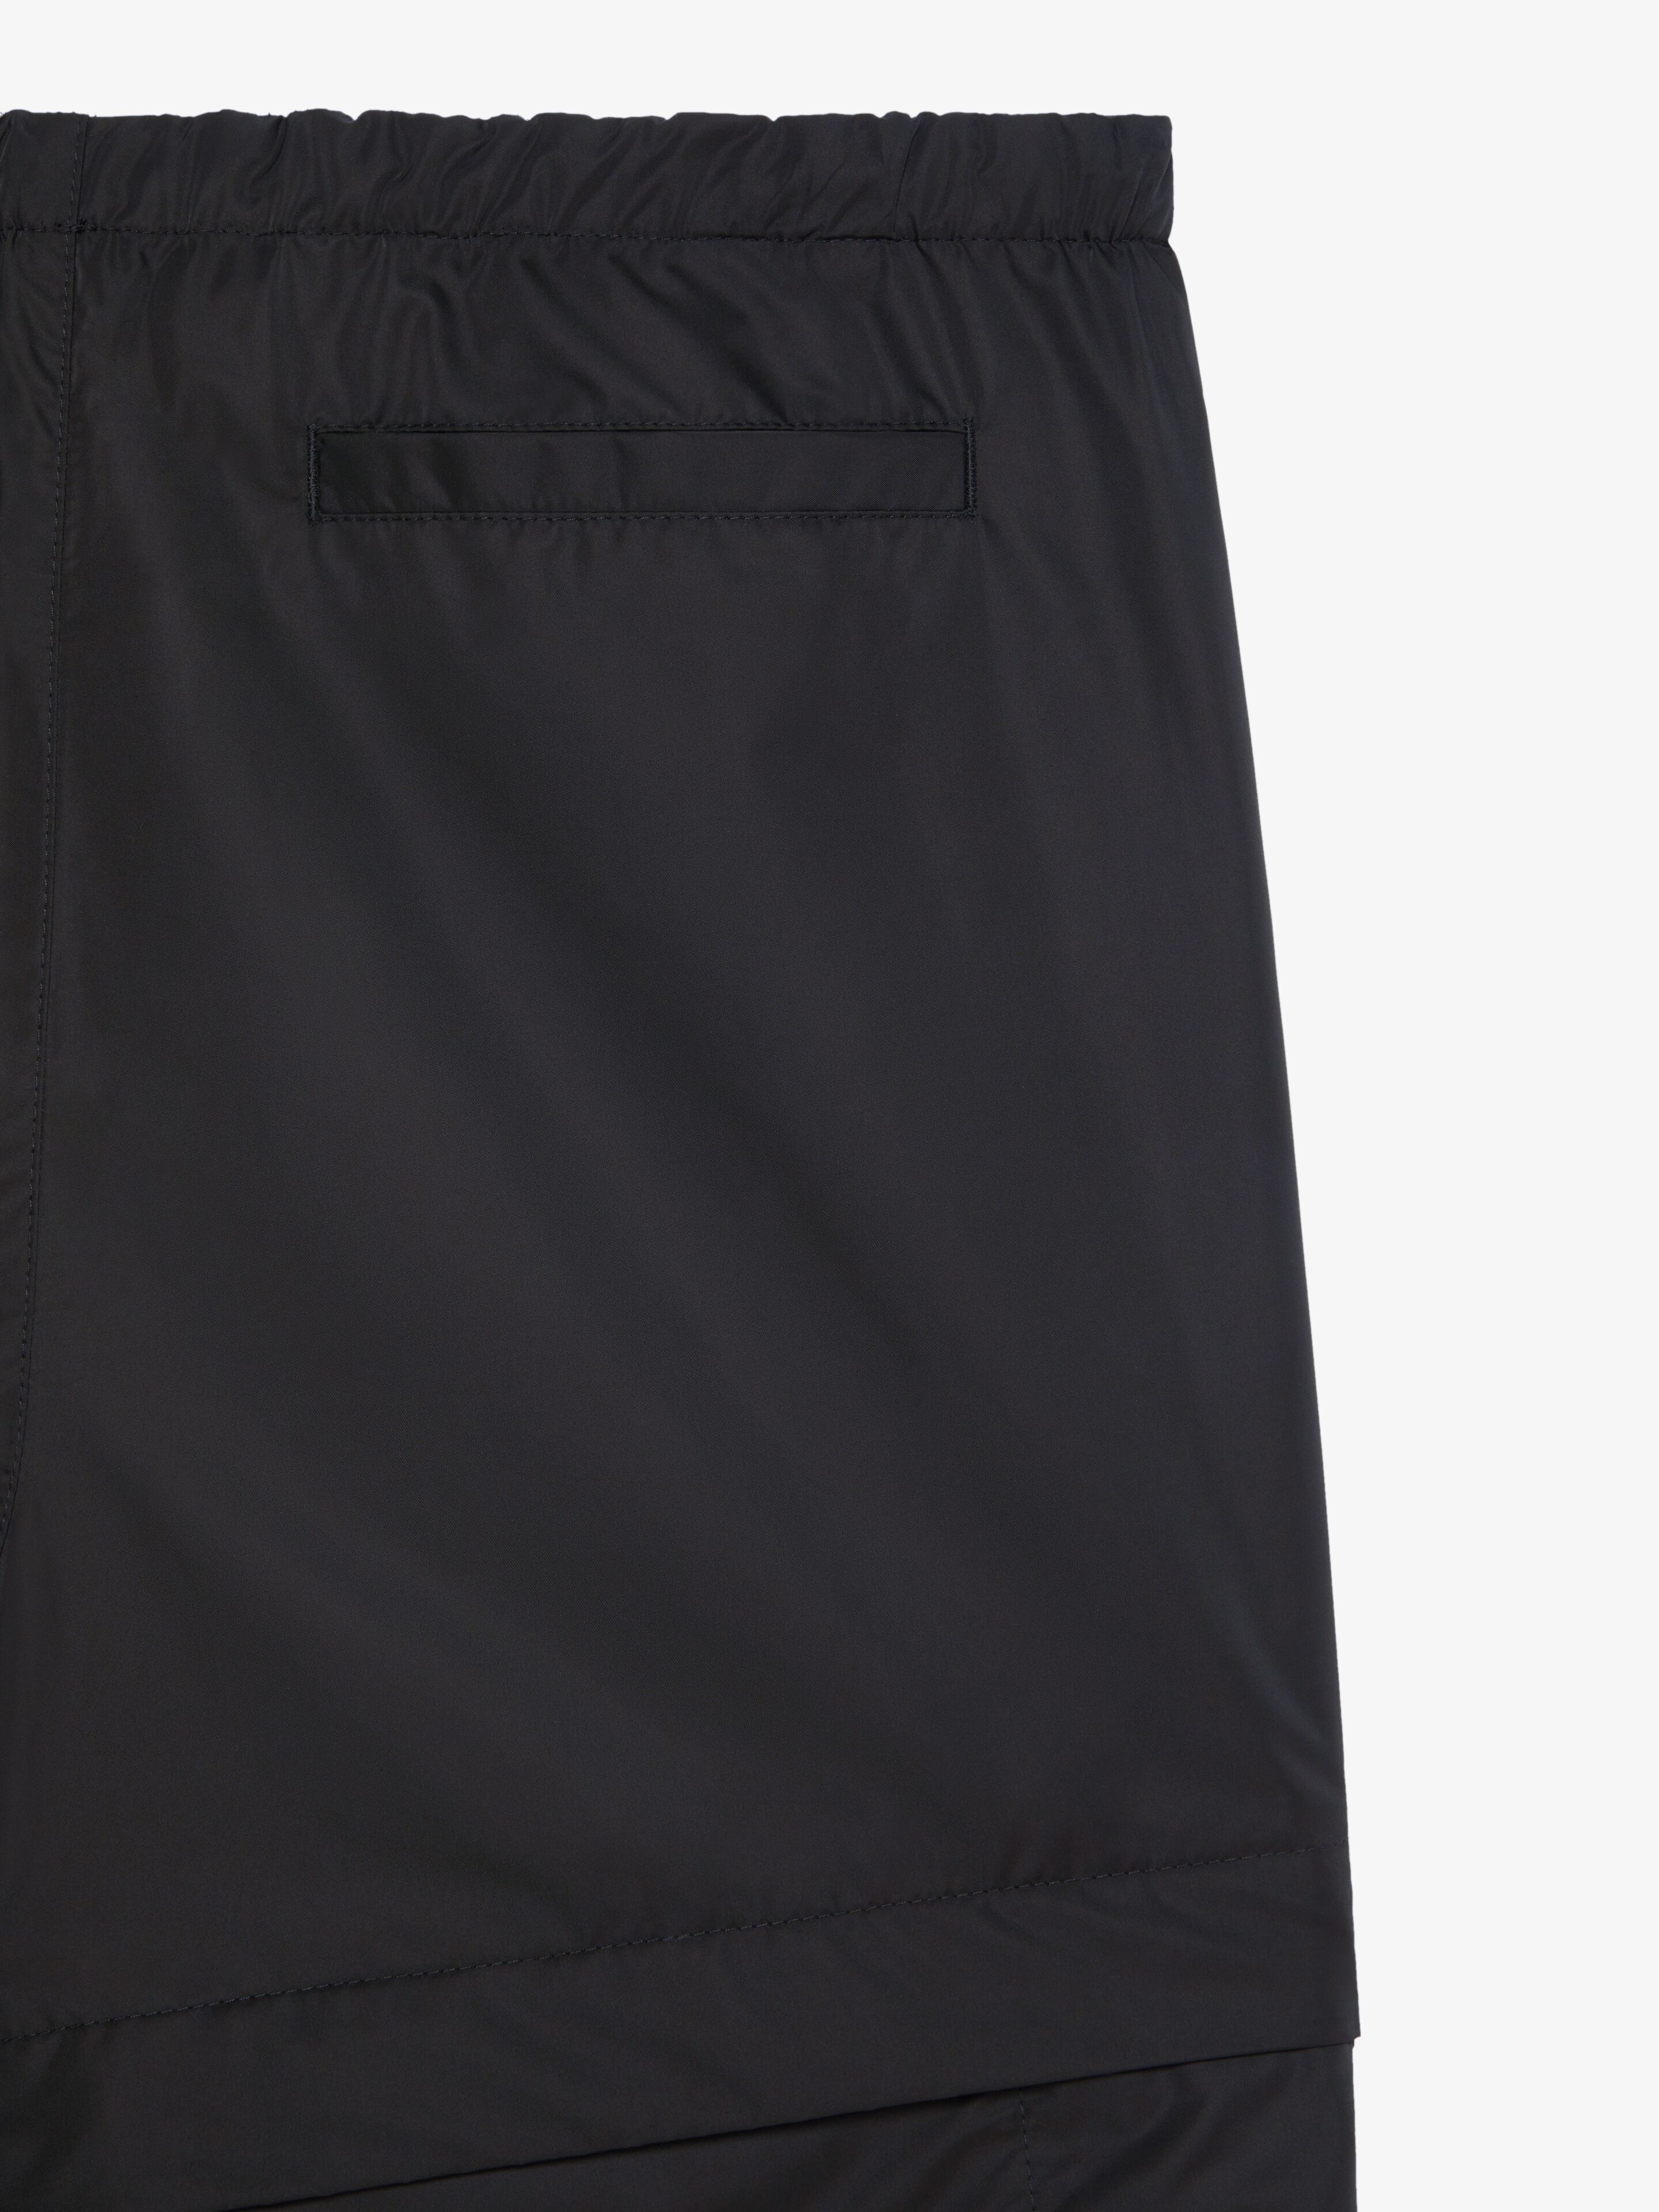 CARGO BERMUDA SHORTS IN TECHNICAL FABRIC WITH BUCKLES - 6